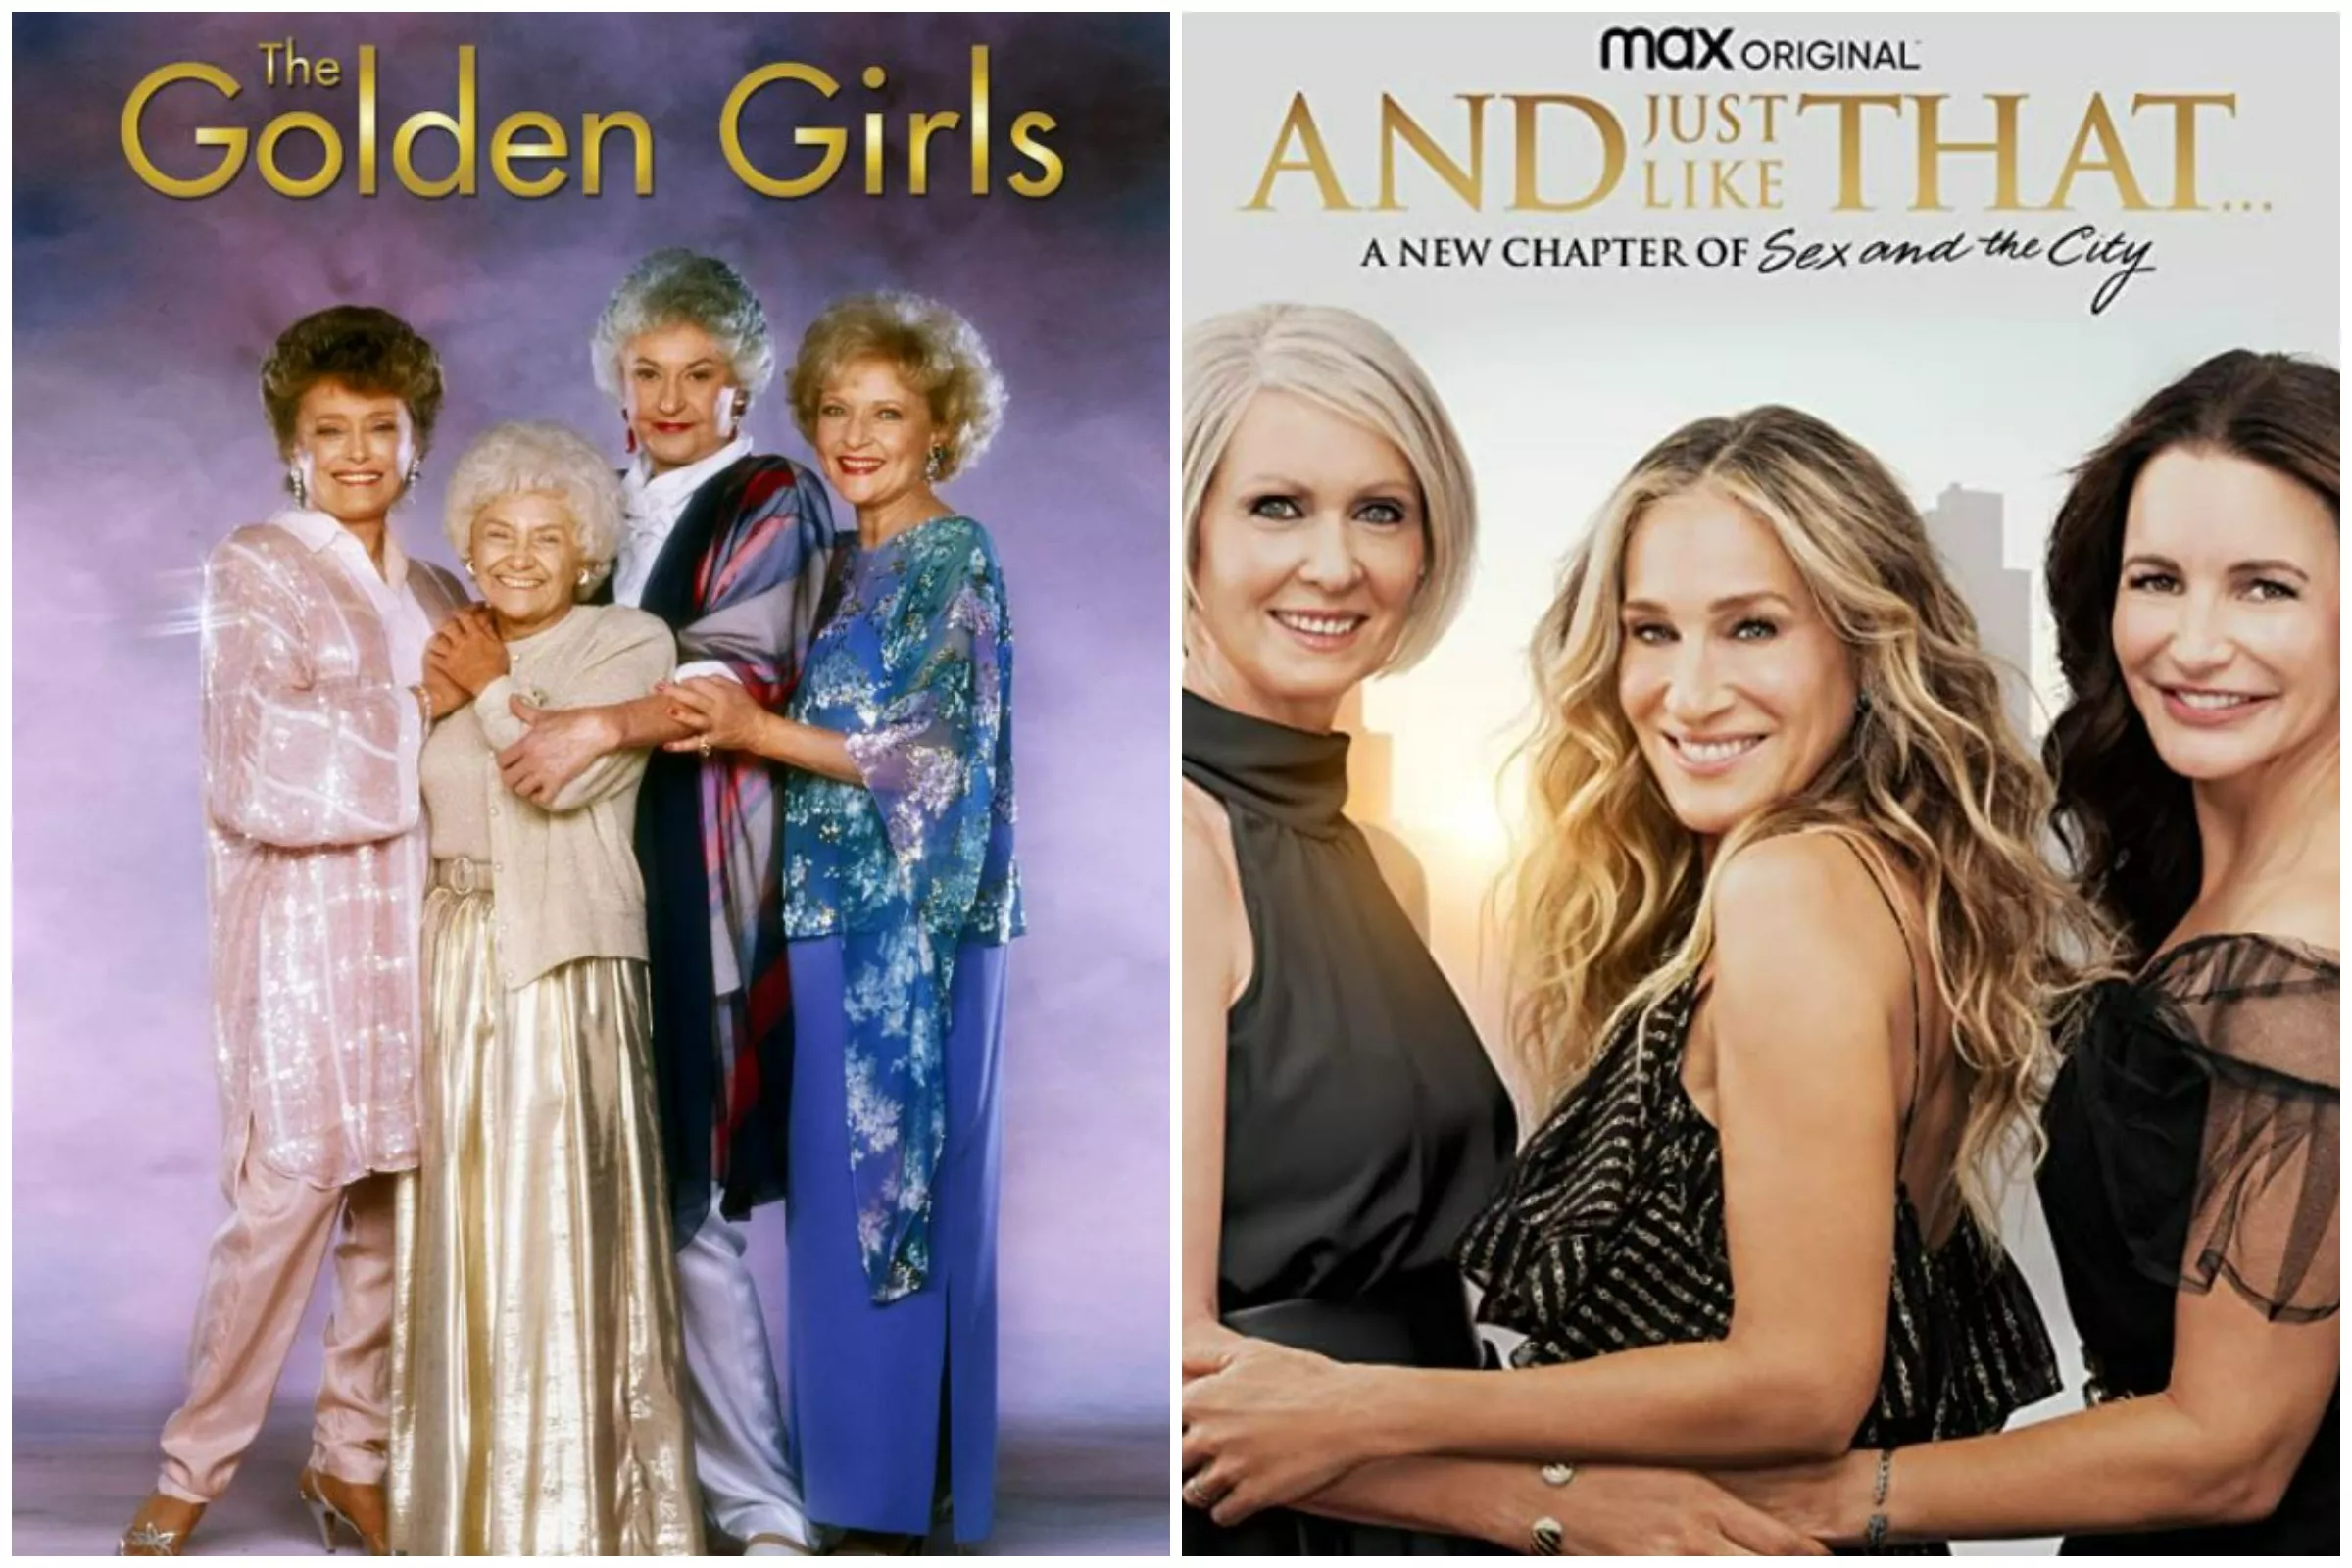 Fans Shocked to Realize The Golden Girls and SATC Reboot Actresses Are the Same